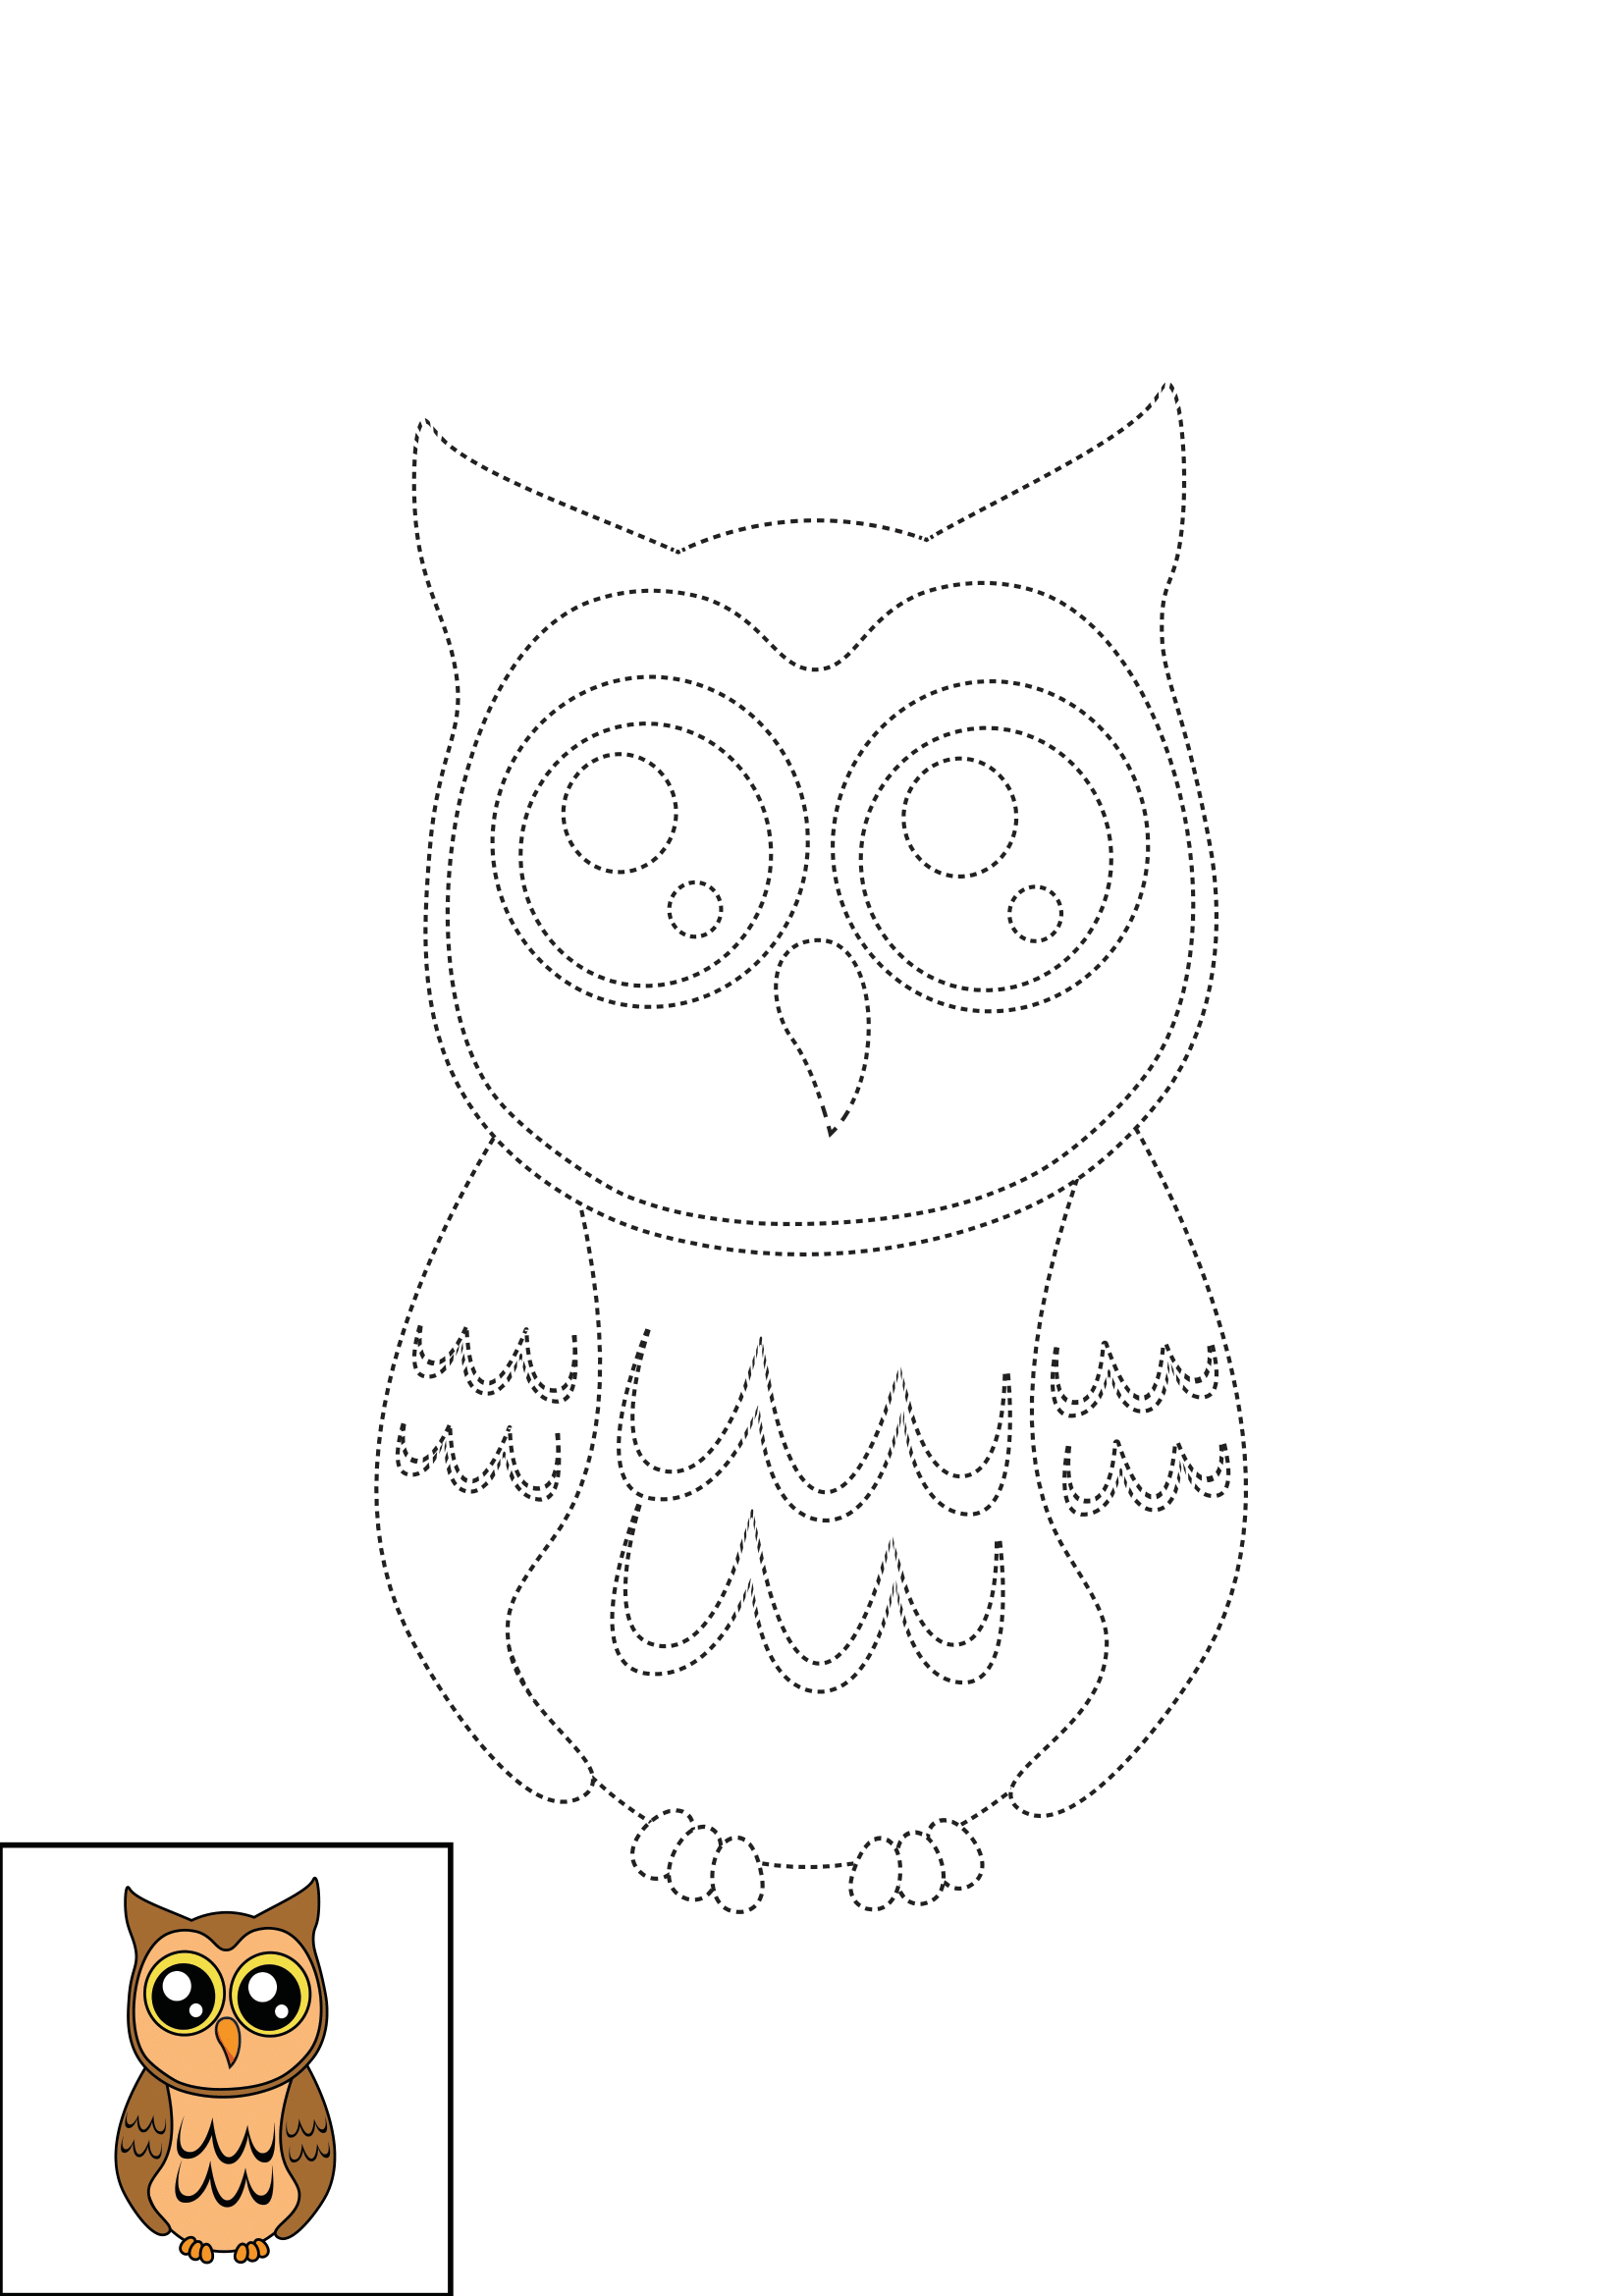 How to Draw A Cute Owl Step by Step Printable Dotted